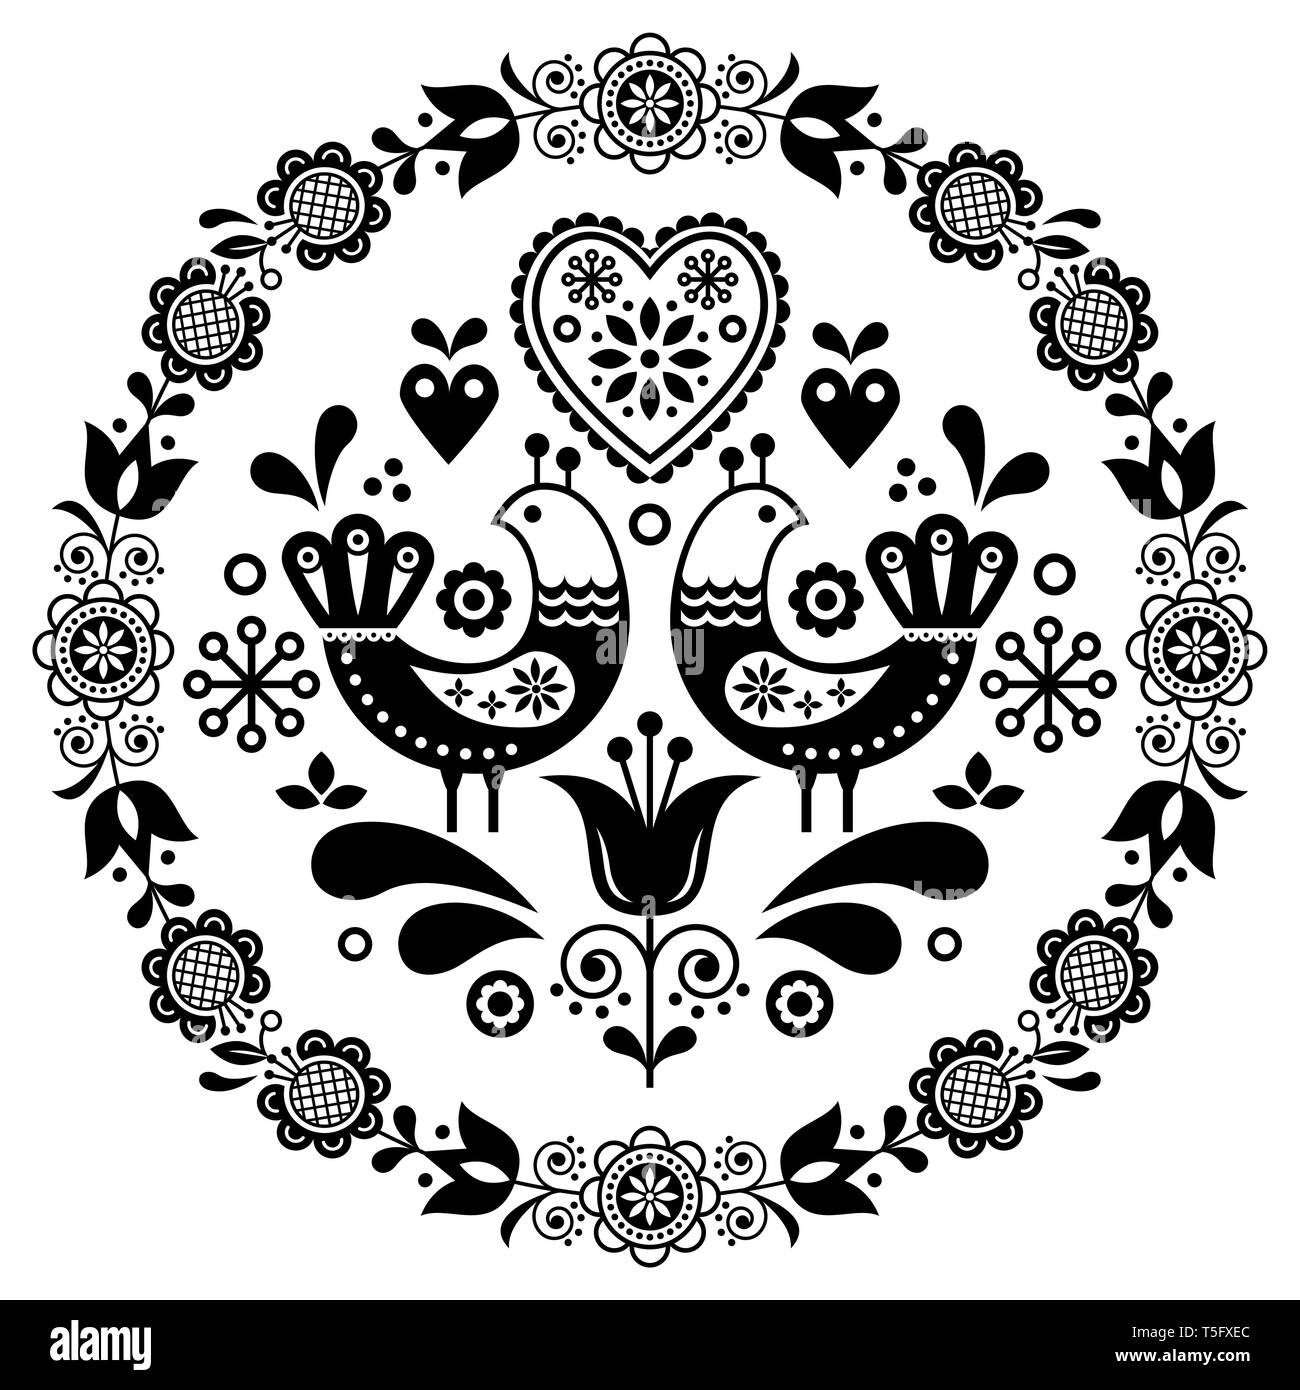 Folk art vector round ornamental frame with birds, hearts, and flowers, Scandinavian design in circle, floral composition Stock Vector